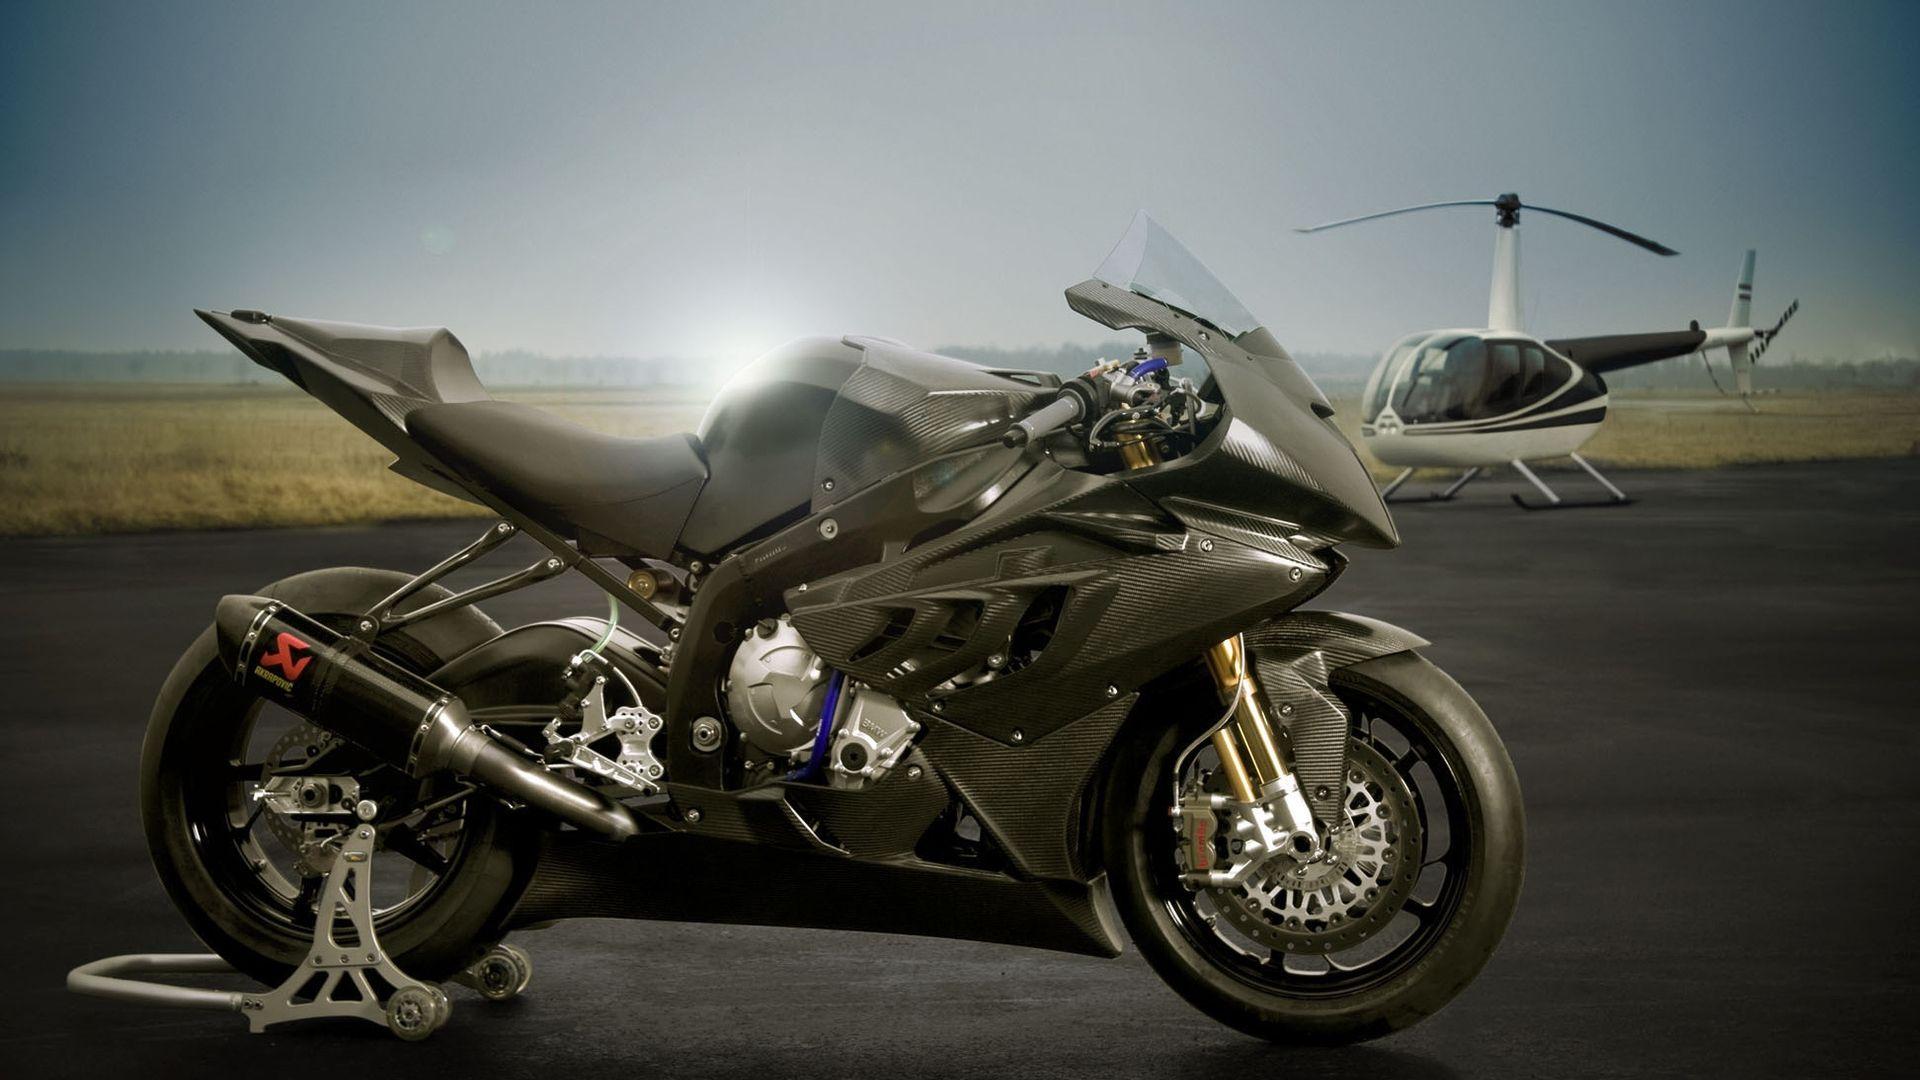 Superbike BMW S1000RR and helicopter wallpaper download